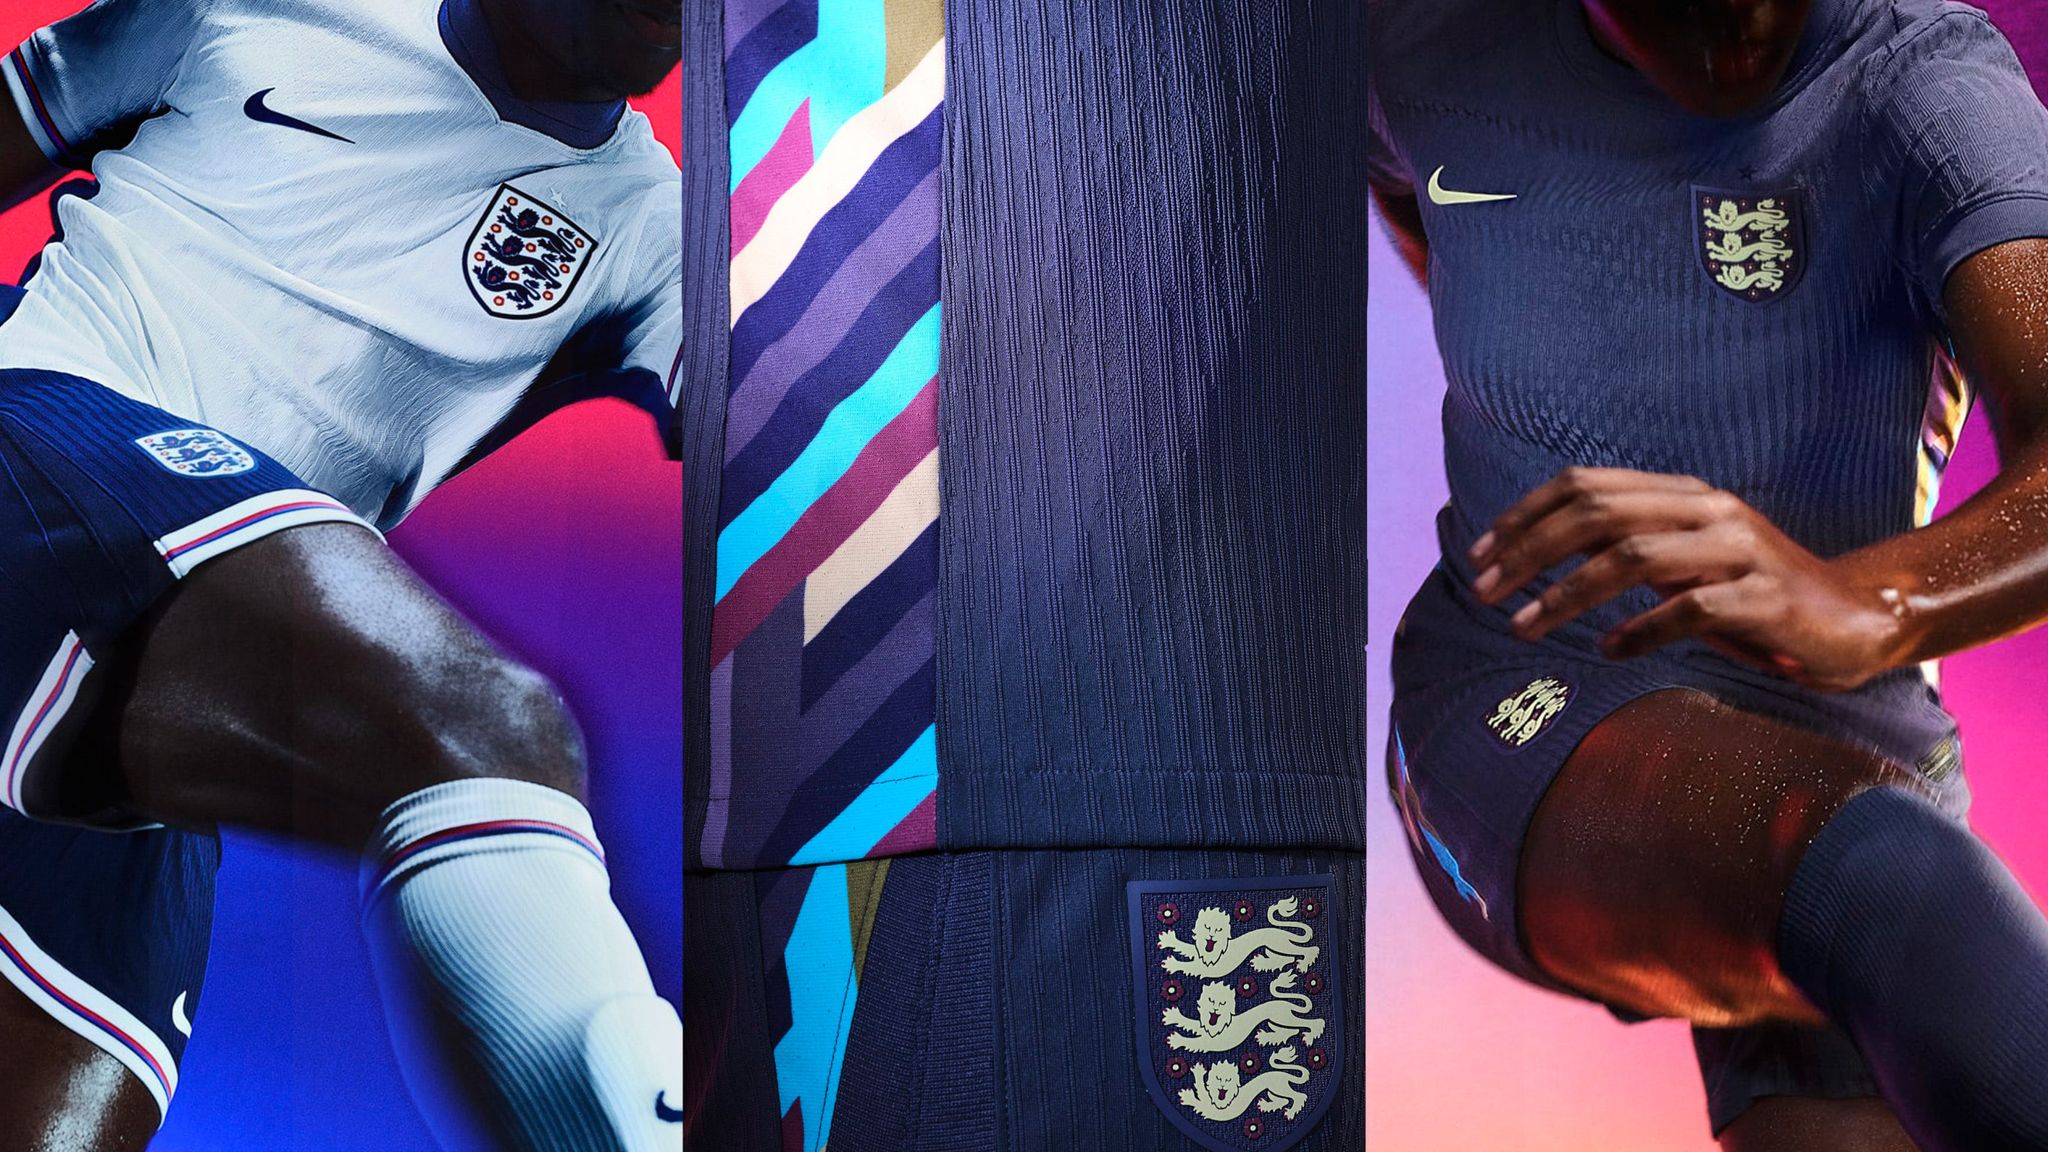 World Cup Brazuca ball unveiled but England won't use it until